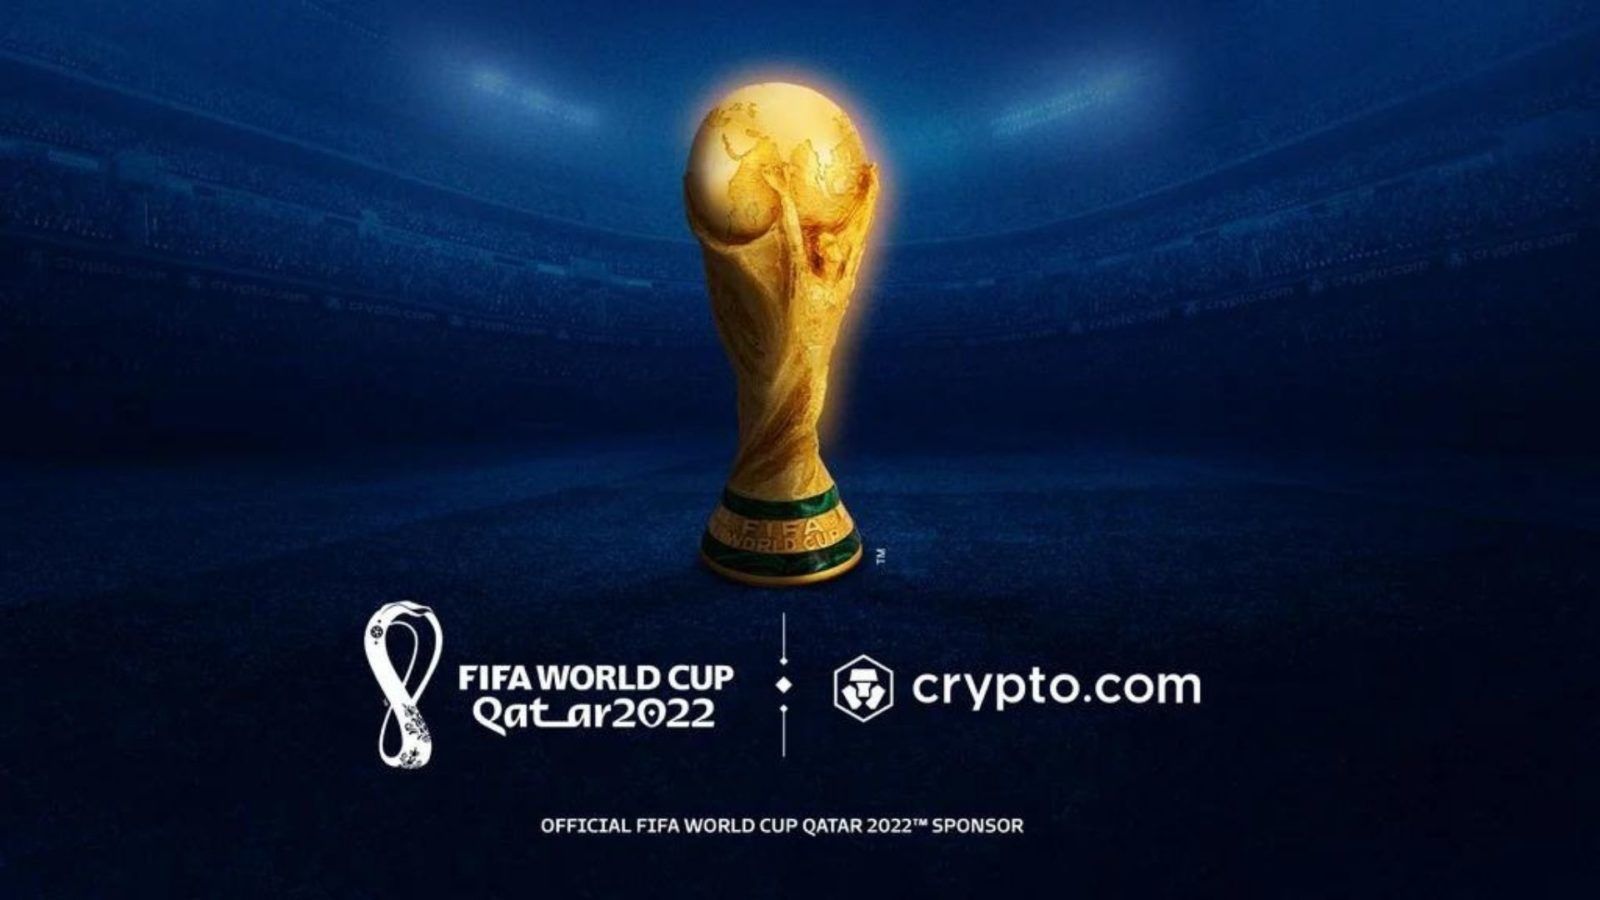 Crypto.com unveiled as an official sponsor for FIFA World Cup Qatar 2022